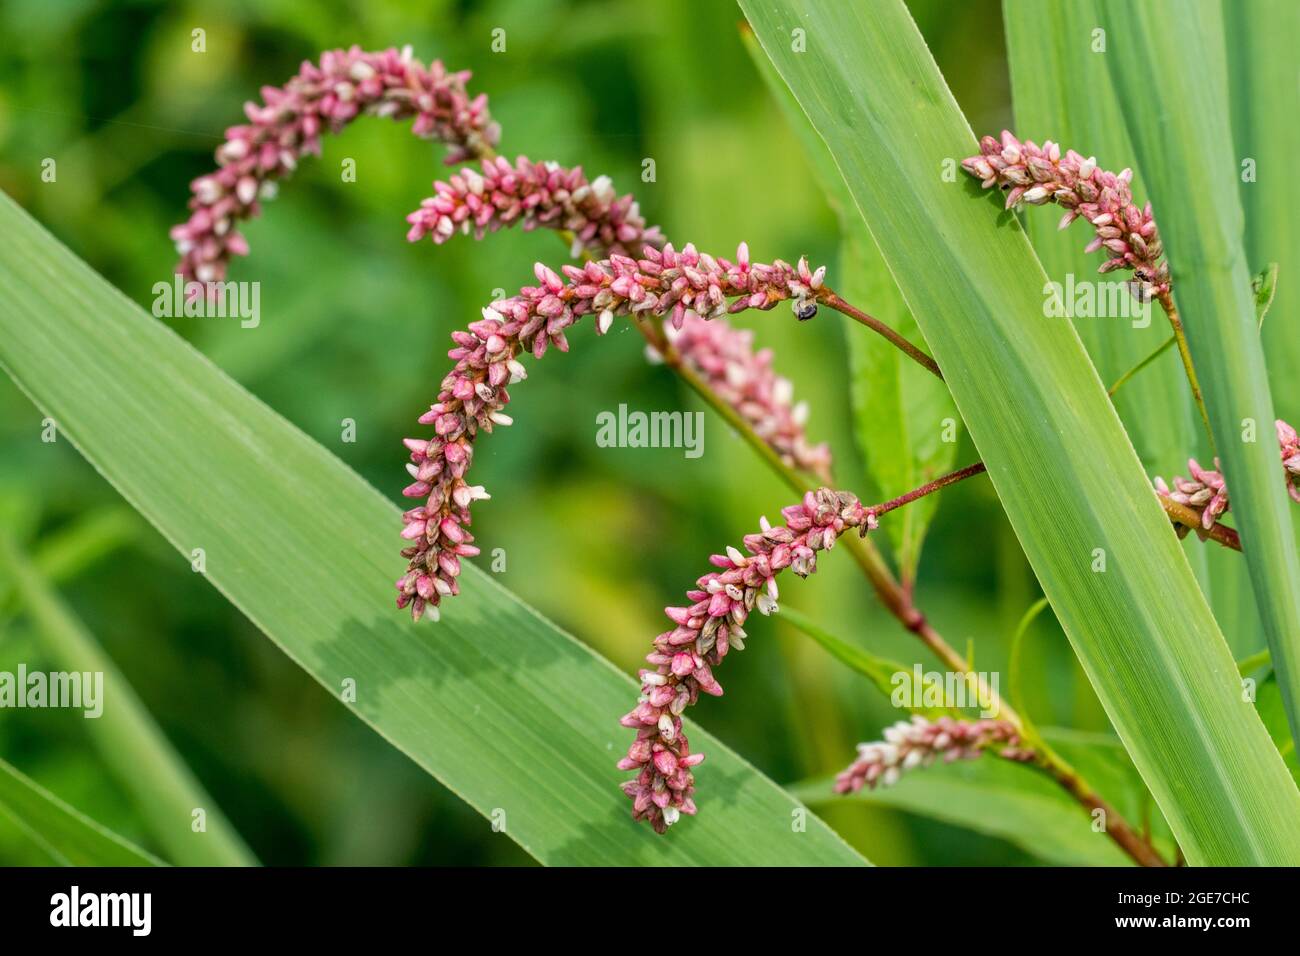 Pale persicaria / pale smartweed / curlytop knotweed / willow weed (Persicaria lapathifolia / Polygonum lapathifolium) in flower in summer Stock Photo